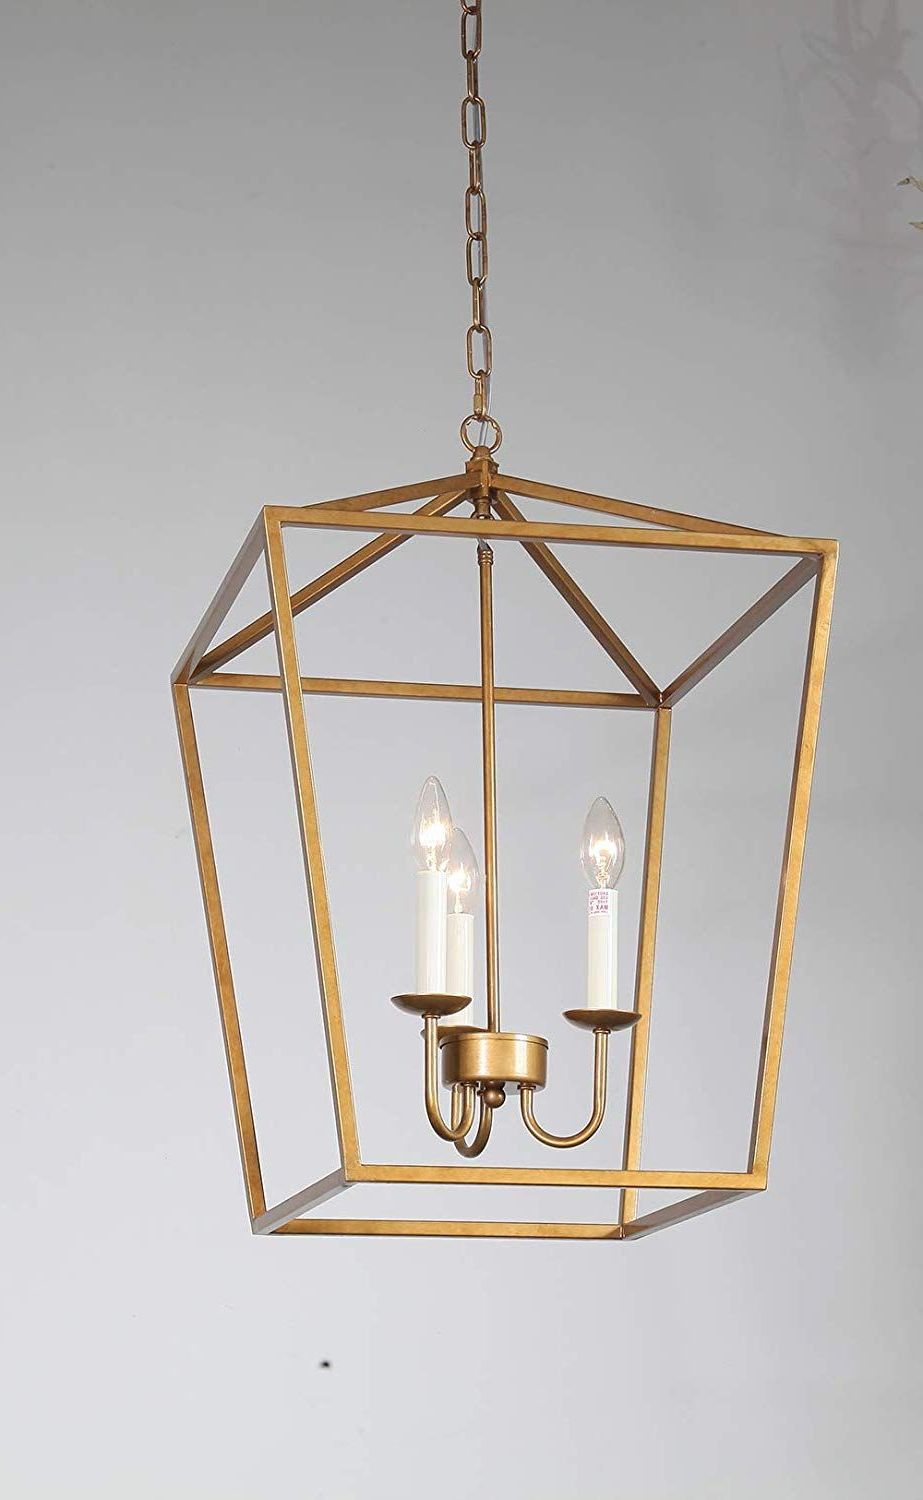 Foyer Lantern Pendant Light Fixture, Dst Gold Iron Cage Chandelier  Industrial Led Ceiling Lighting, Size: D17'' H25'' Chain 45'' (View 3 of 10)